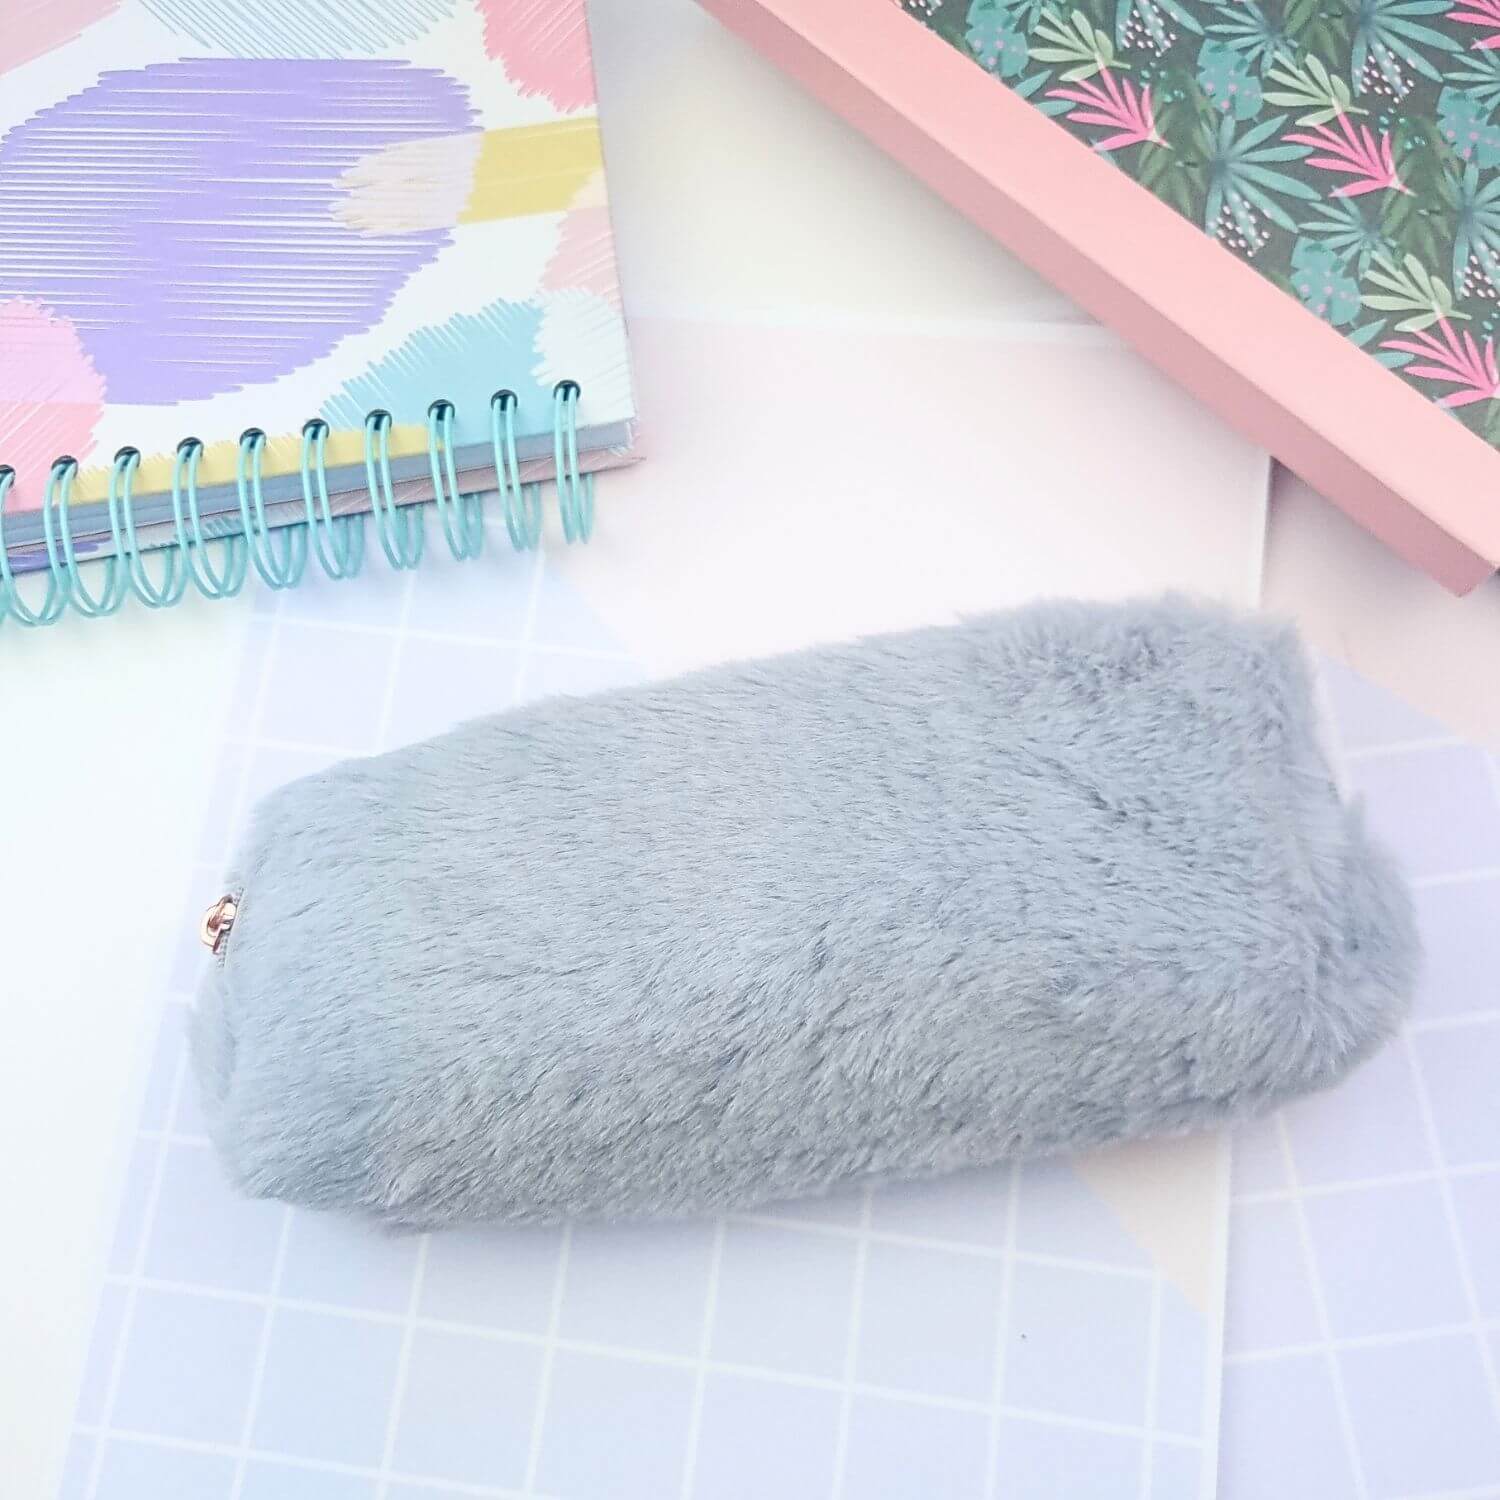 grey pencil case stationery gift